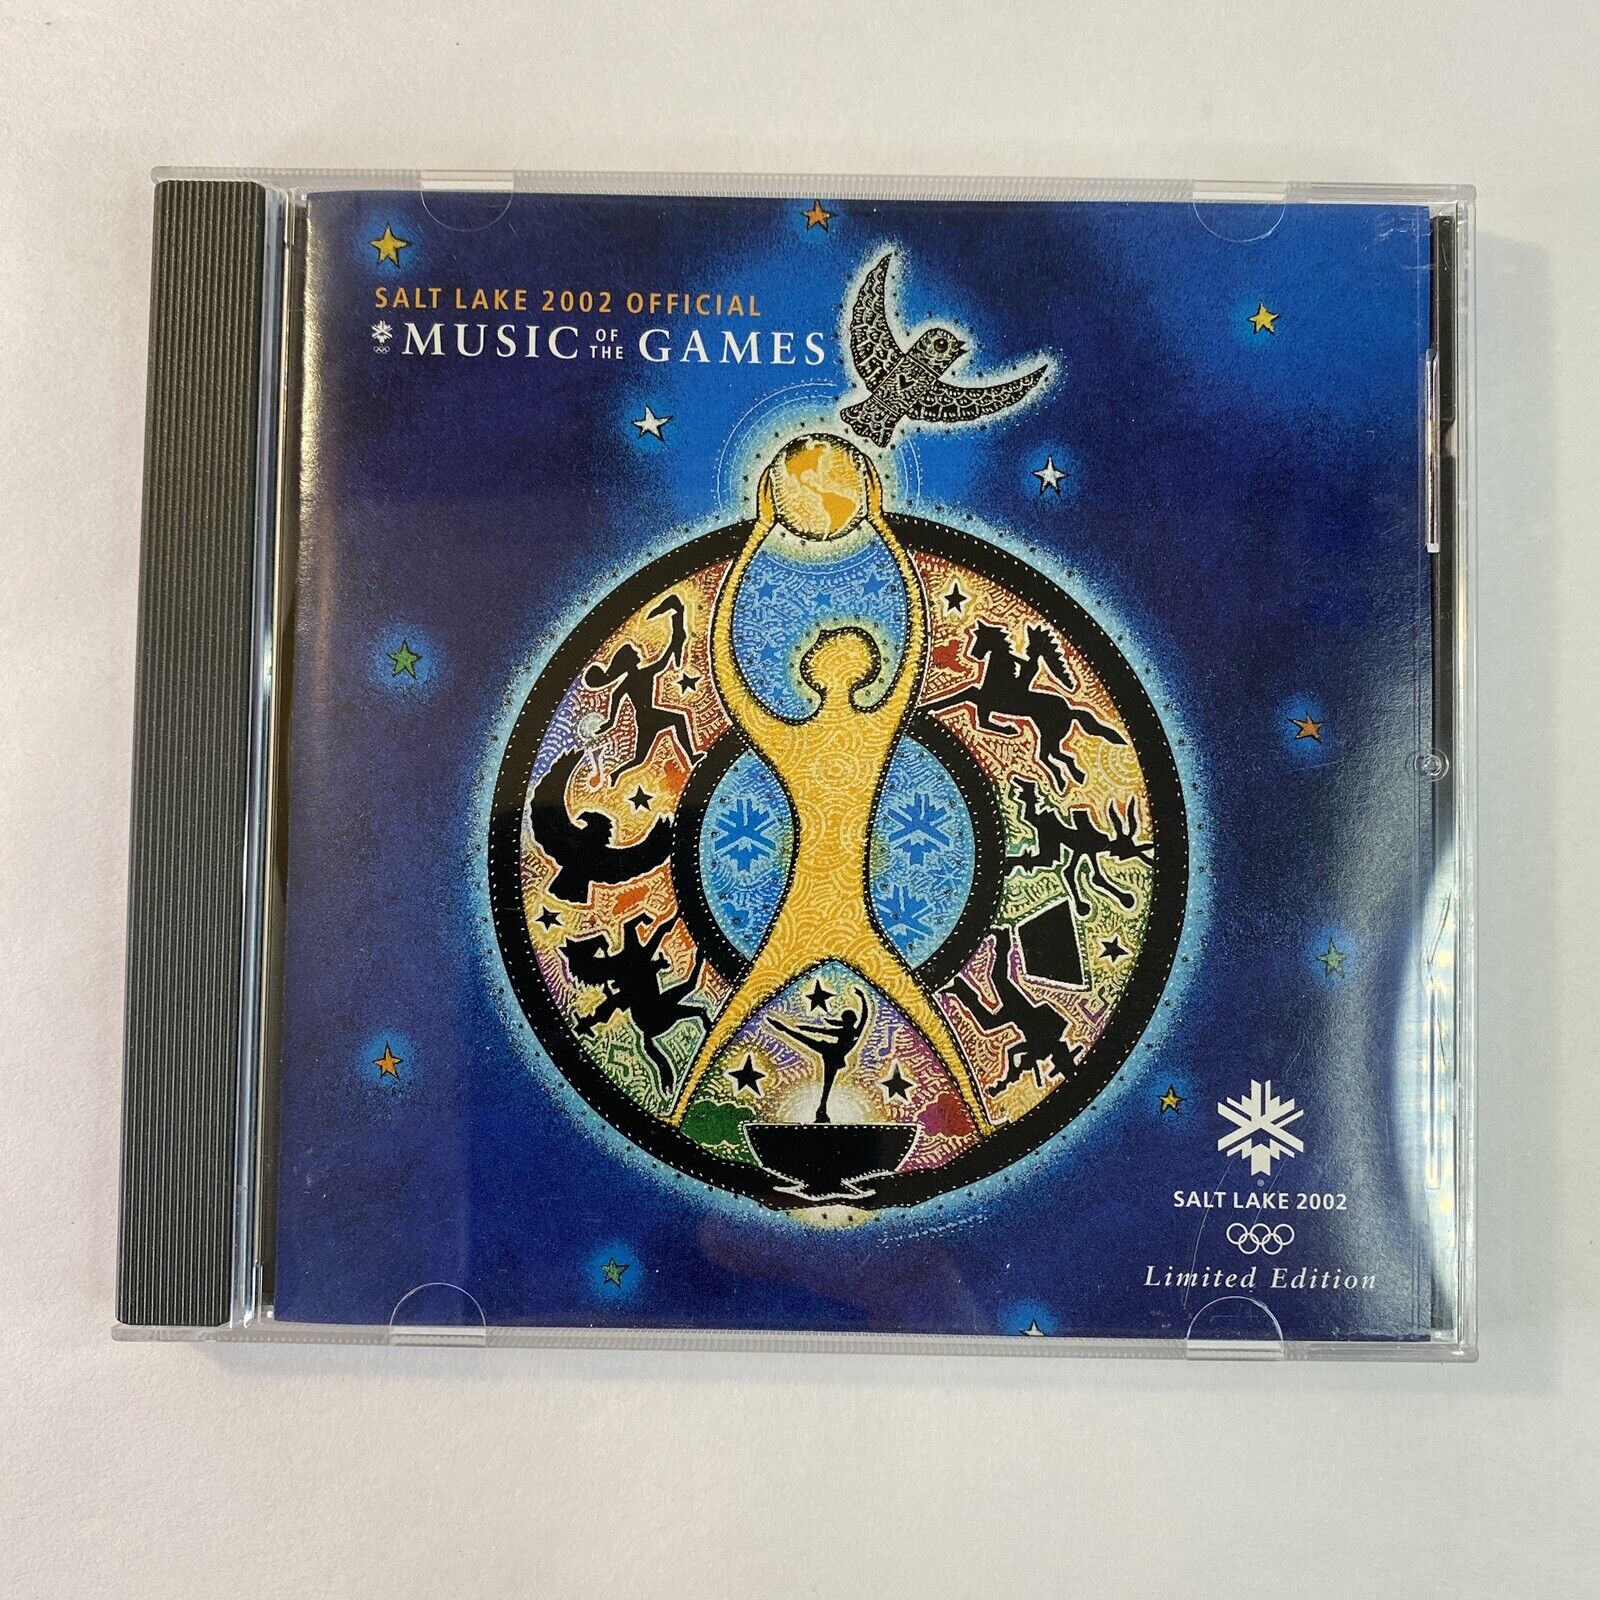 Salt Lake 2002: Music of the Games Limited Edition by Various Artists (CD, NBC)